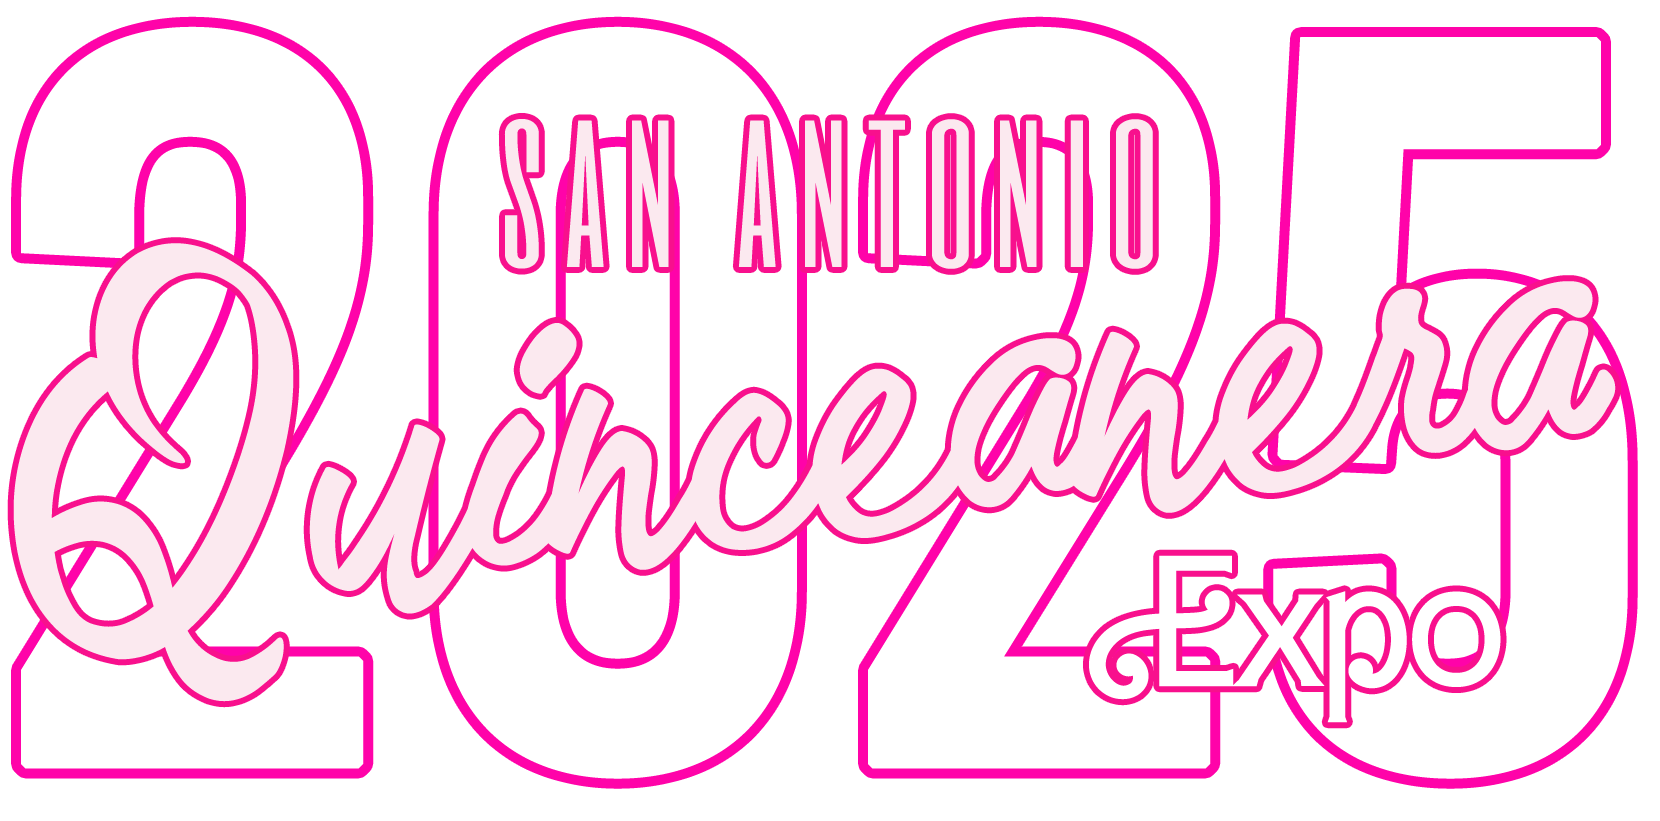 San Antonio Quinceanera Expo February 23rd, 2025 At the Henry B. Gonzalez From 12:00 to 5pm